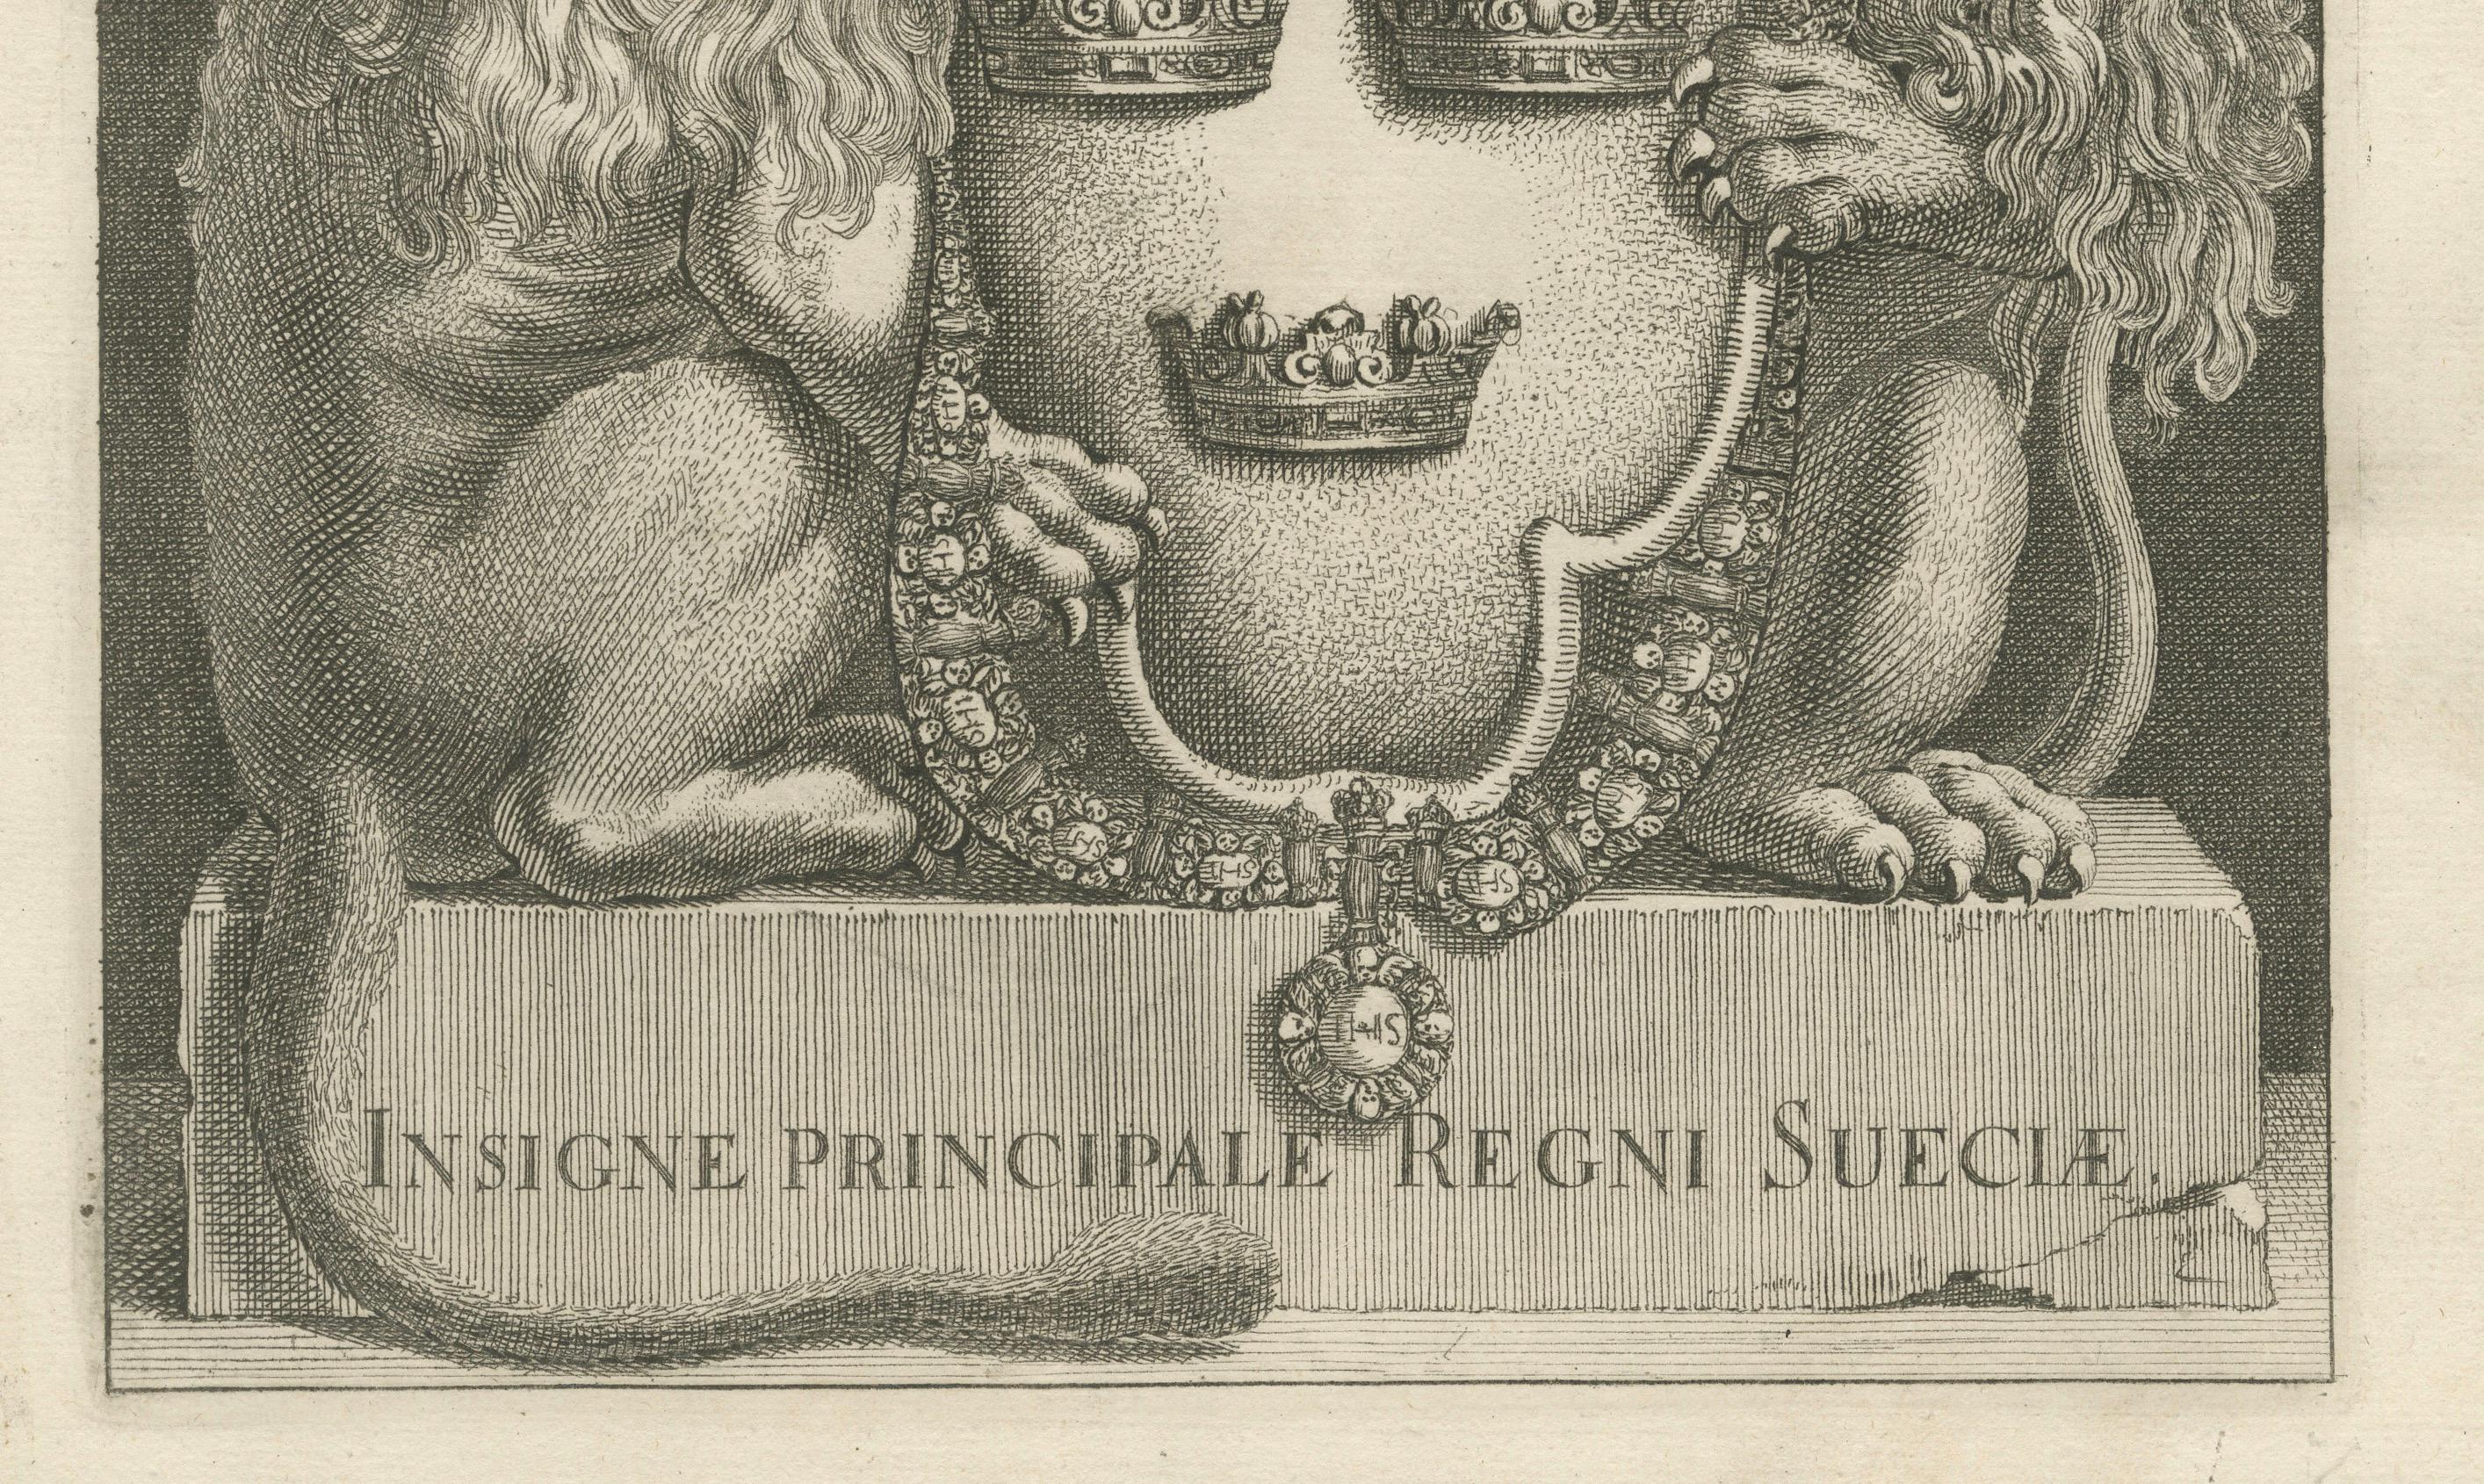 This is an original detailed engraving of the greater coat of arms of Sweden, referred to in Swedish as 